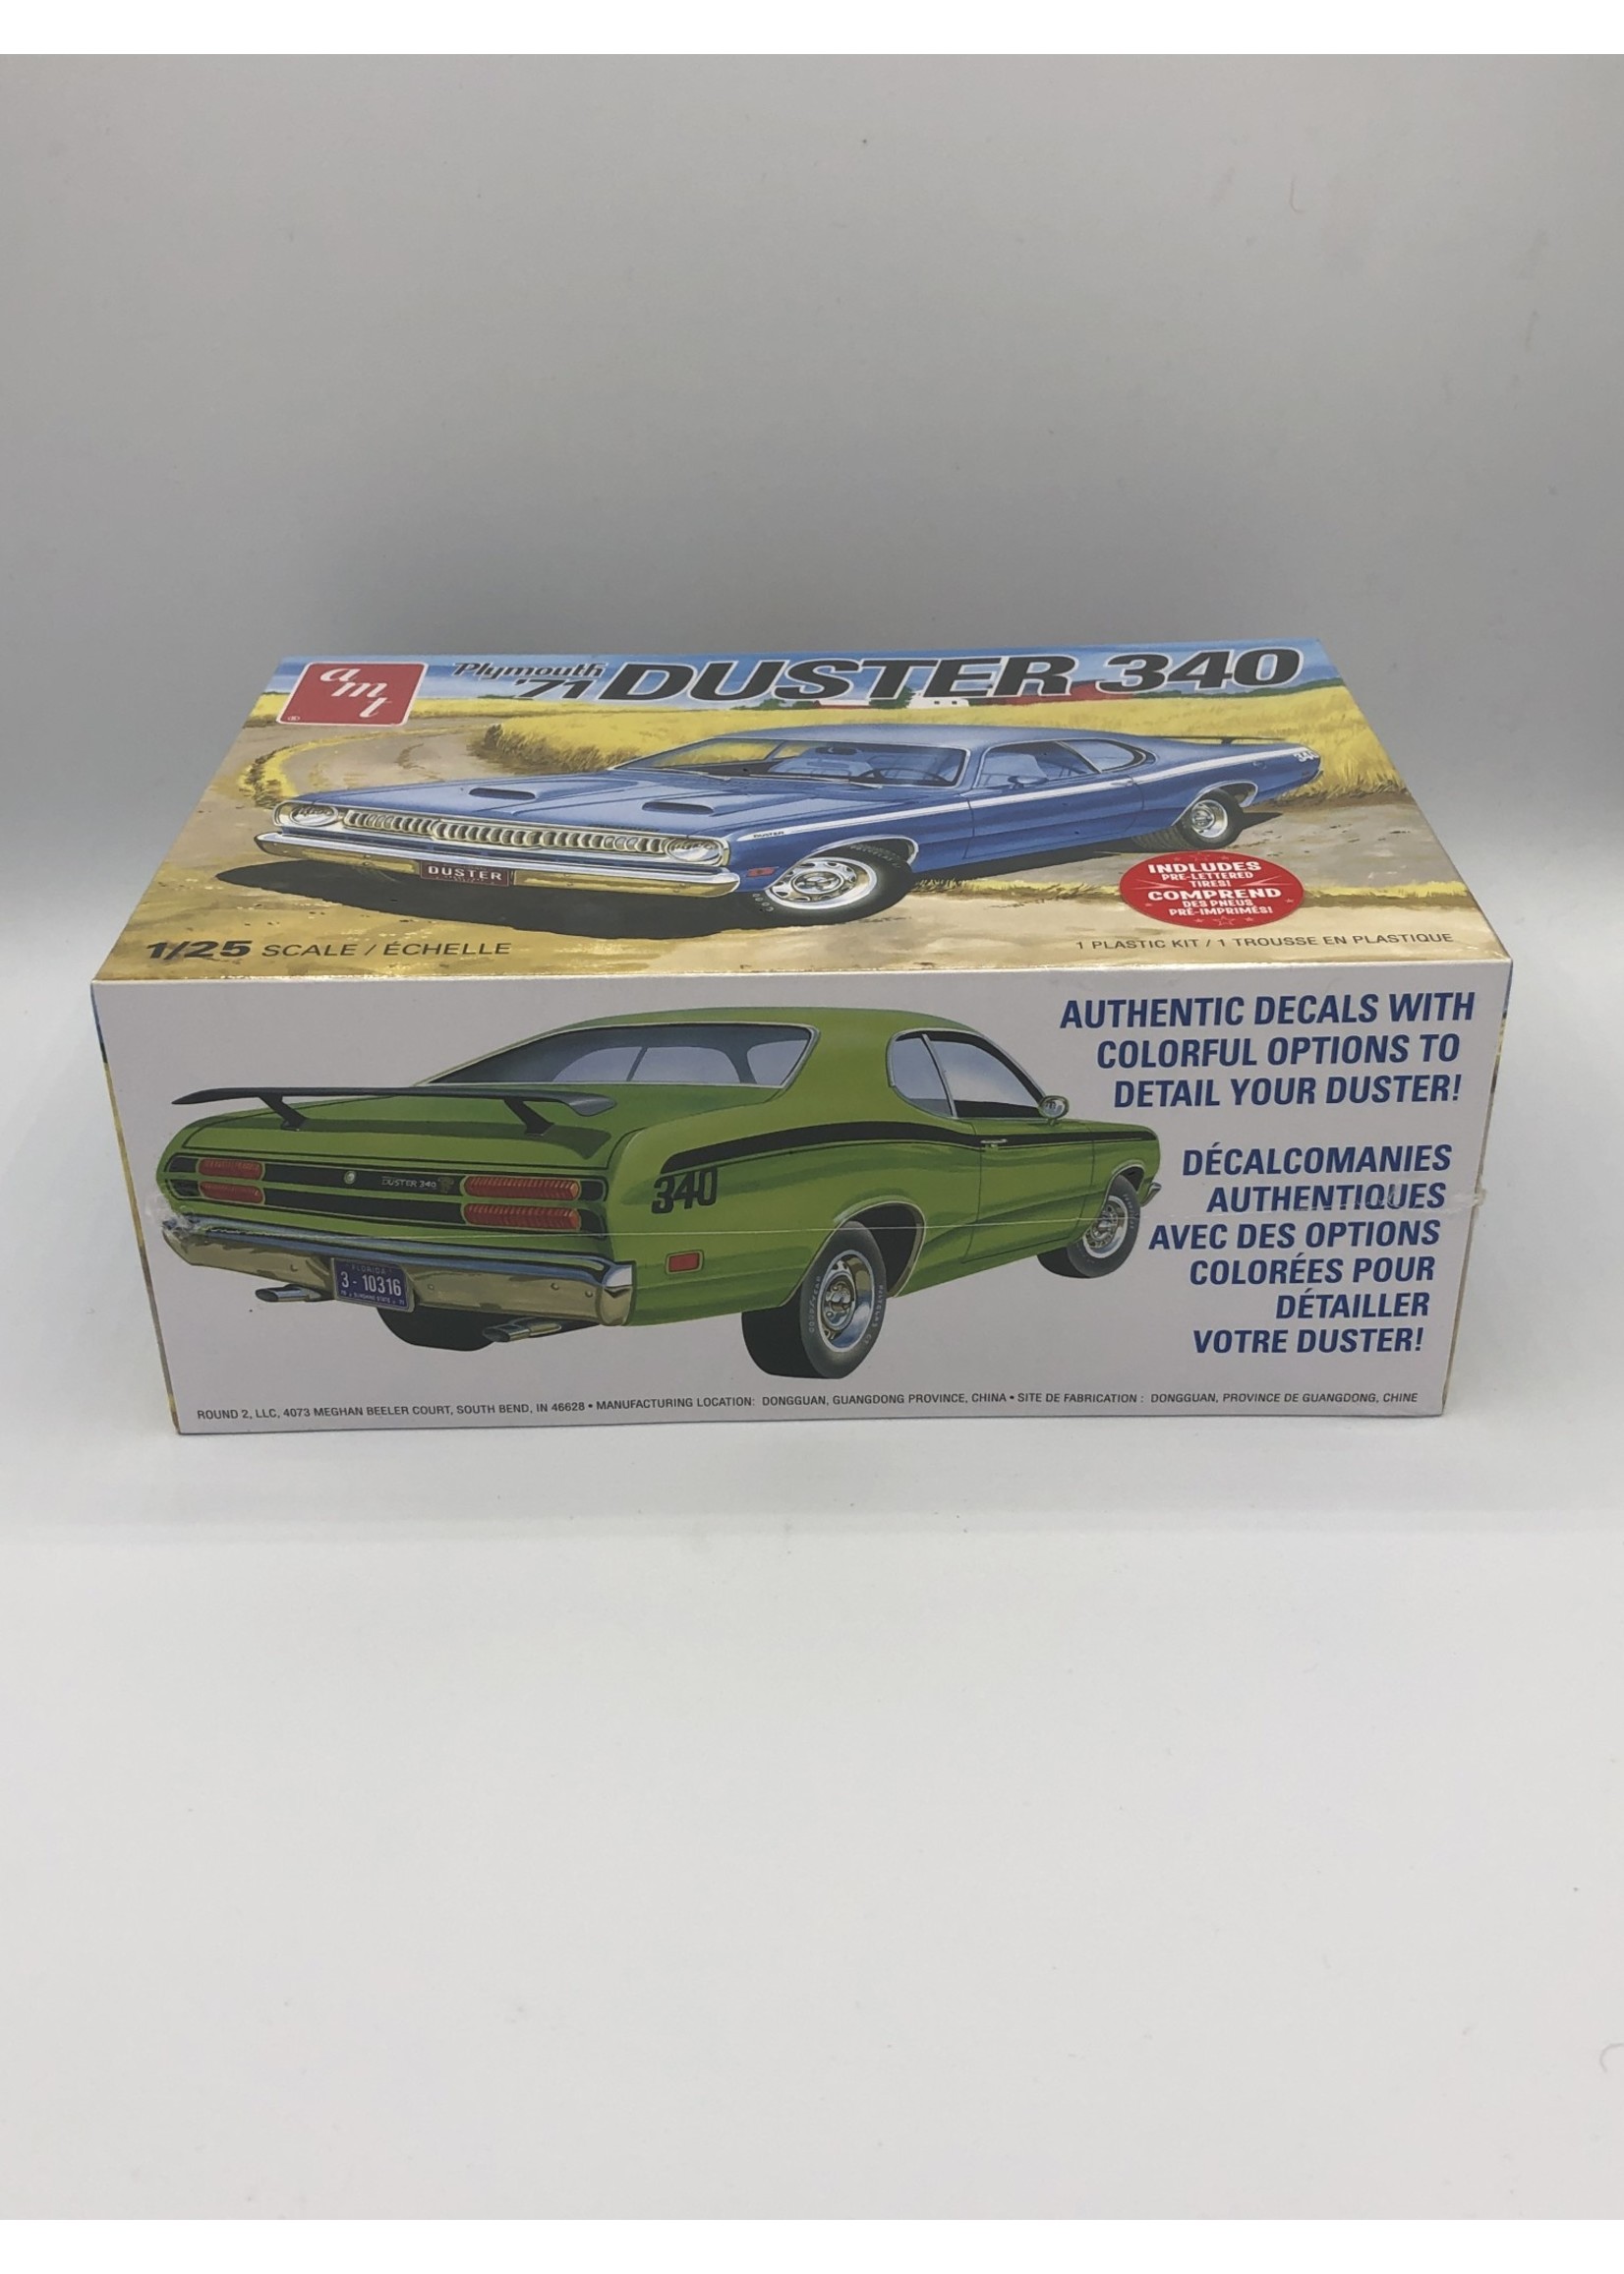 Models AMT 1971 Plymouth Duster 340 Model